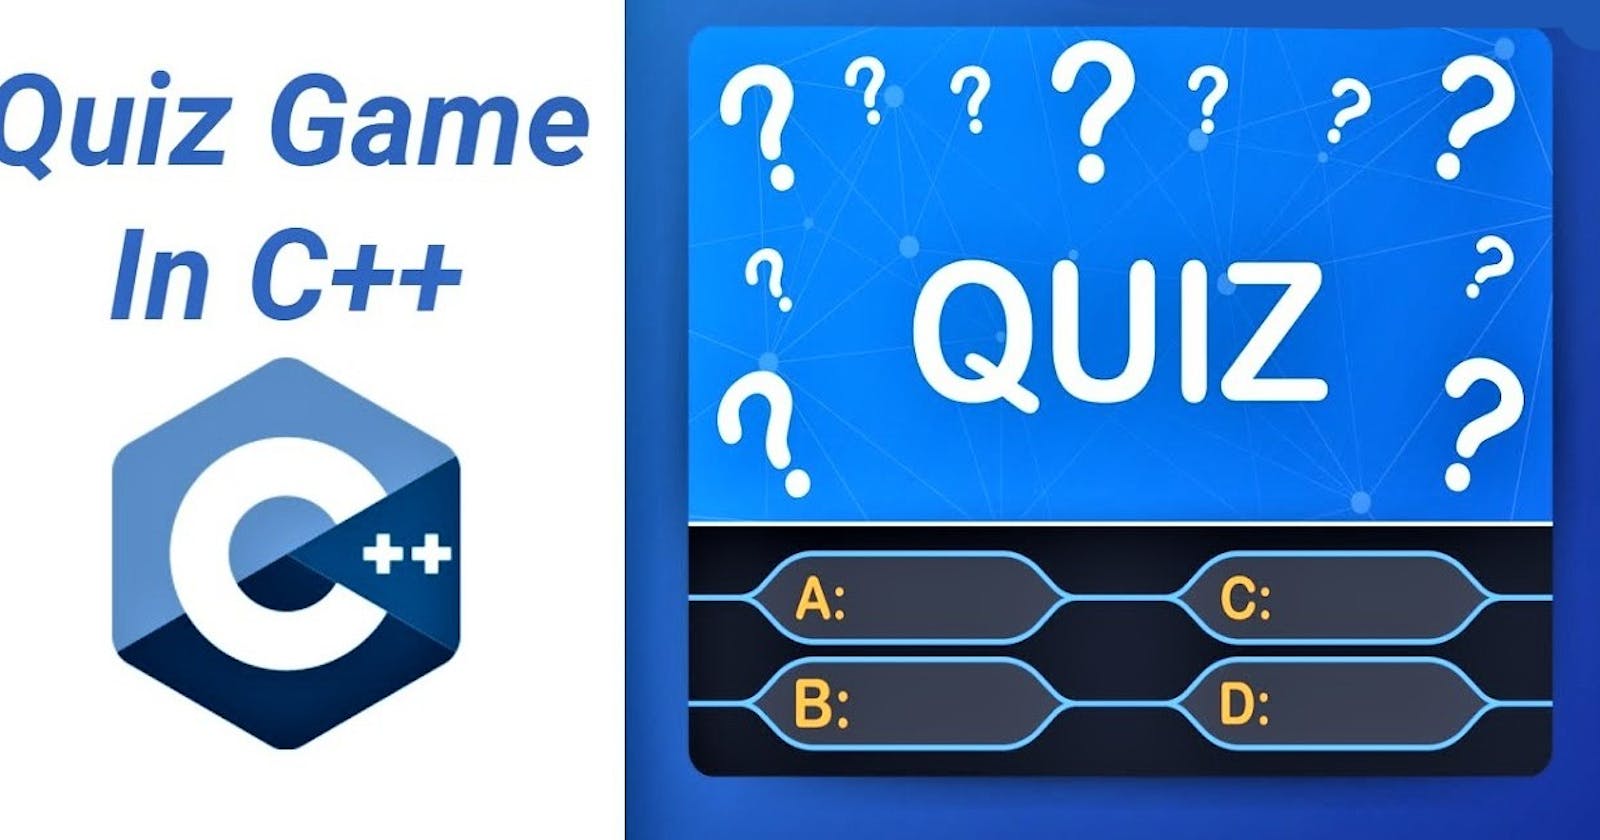 How To Create a Quiz Game using c++